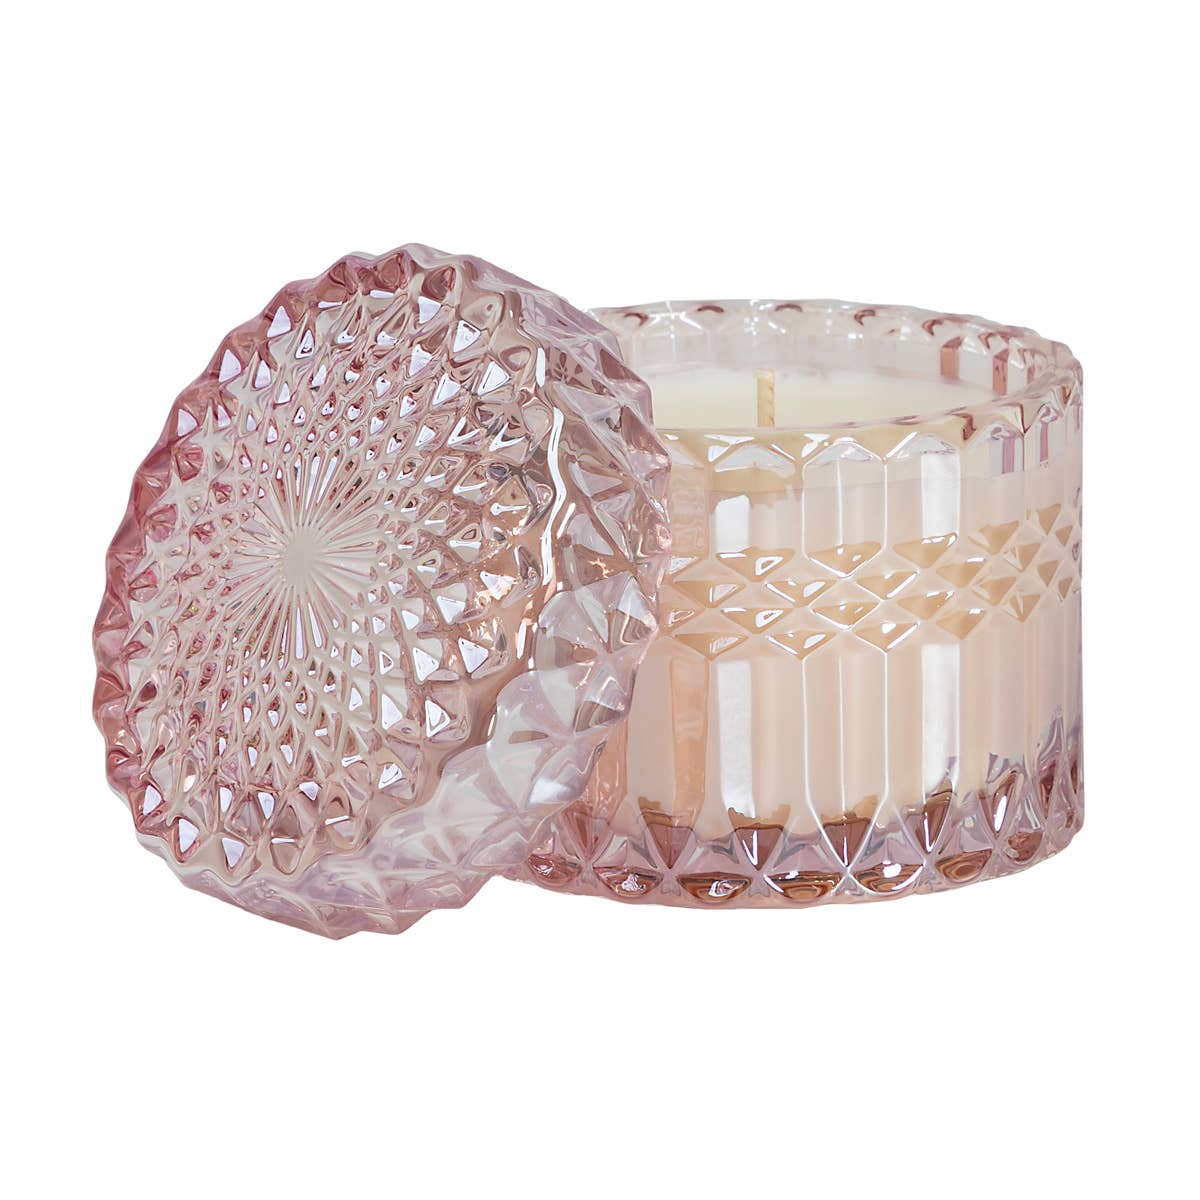 The SOi Company - Pink Chiffon Petite Shimmer Candle